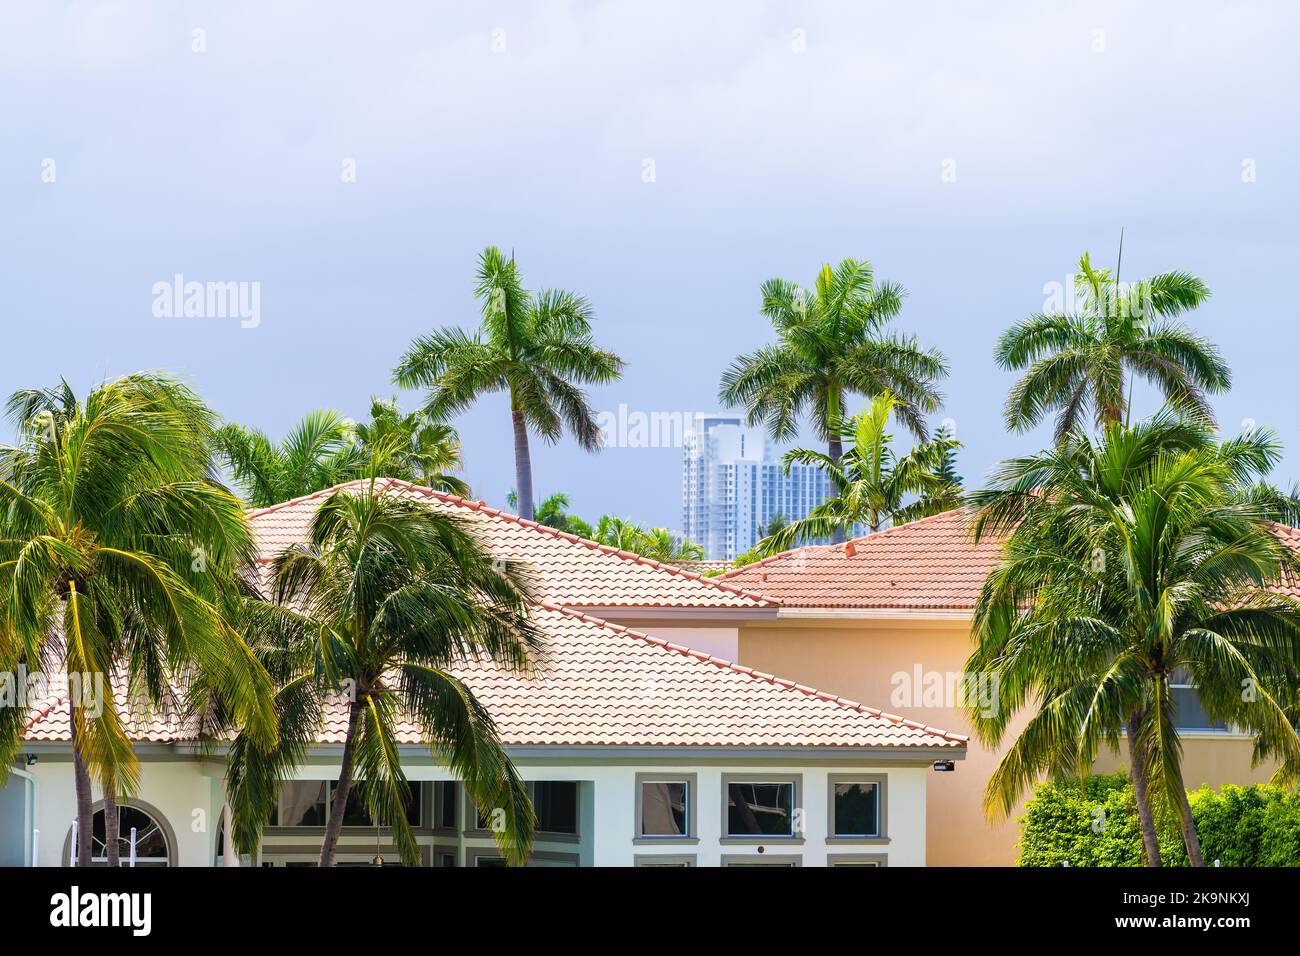 Miami, Florida real estate property modern mansion luxury villa house in Hollywood by Hallandale beach Three Islands with palm trees on summer day Stock Photo